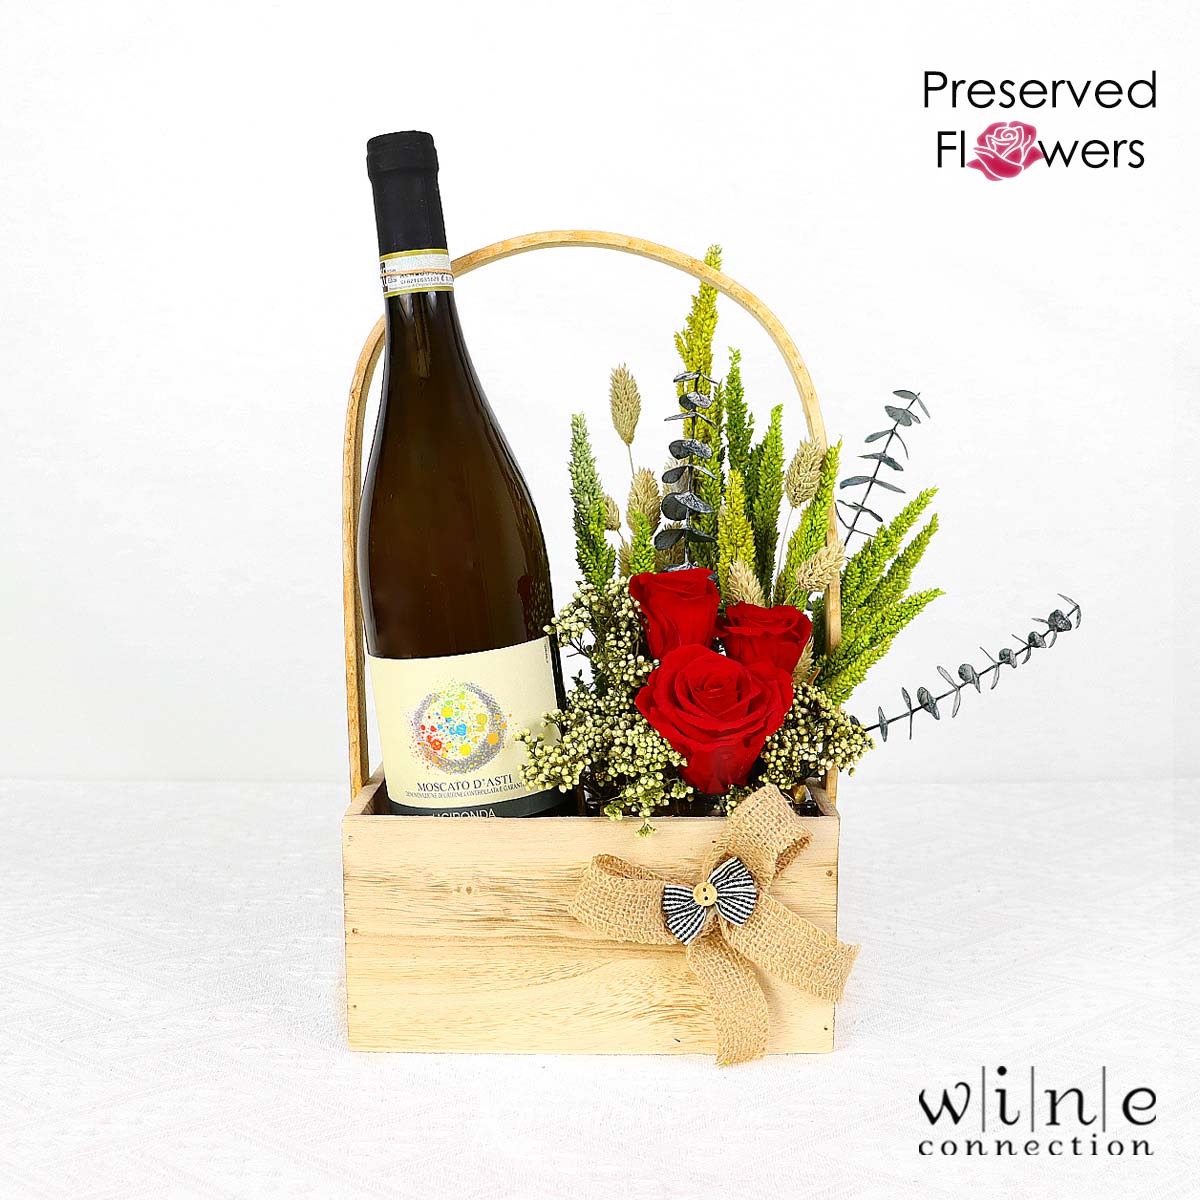 Charming Treasures (Moscato D' Asti with Preserved Flowers Arrangement)